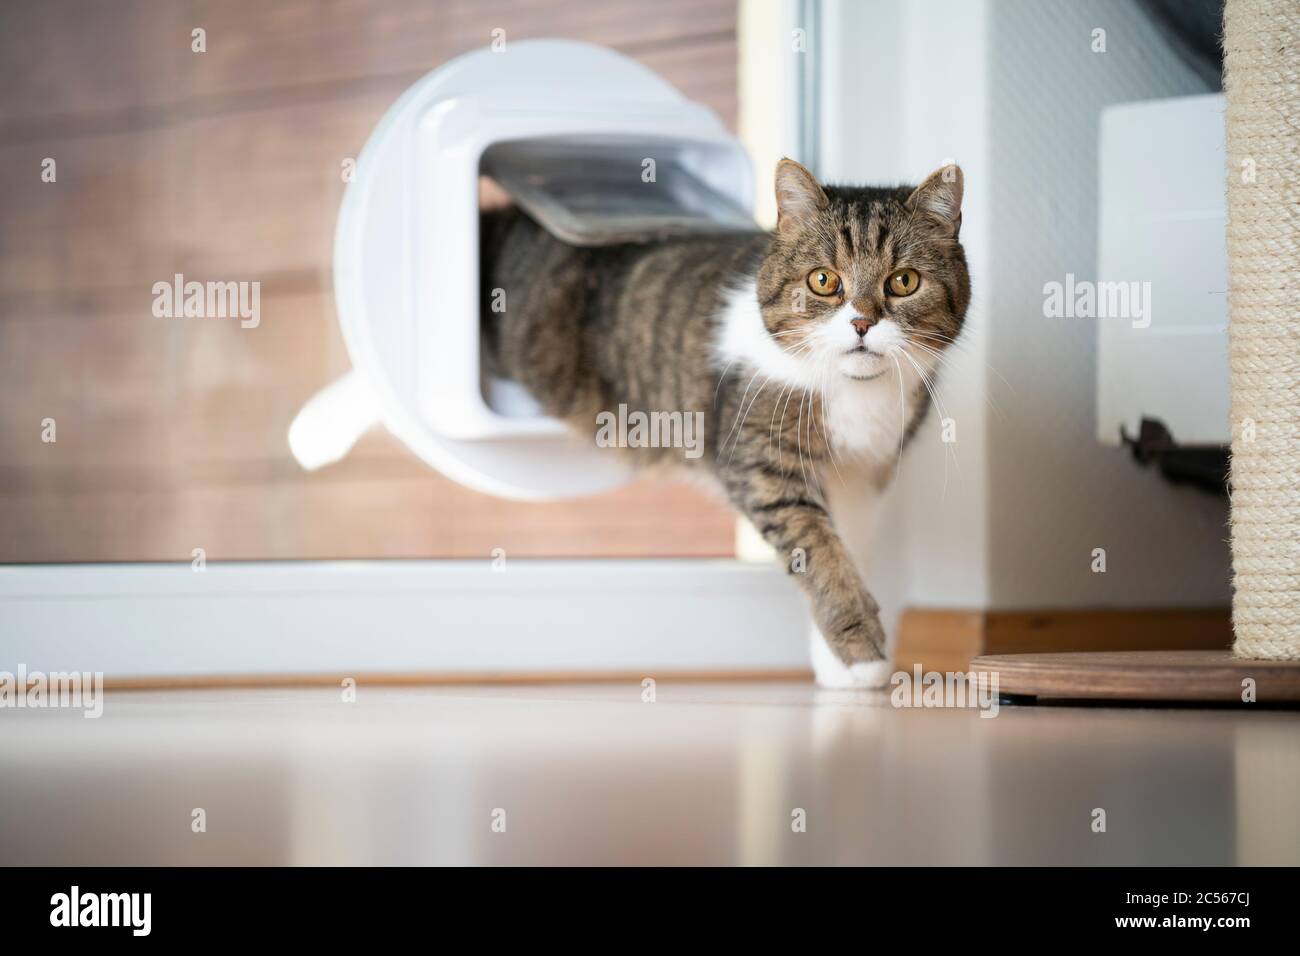 tabby white british shorthair cat coming home entering room through cat flap in window looking at camera Stock Photo